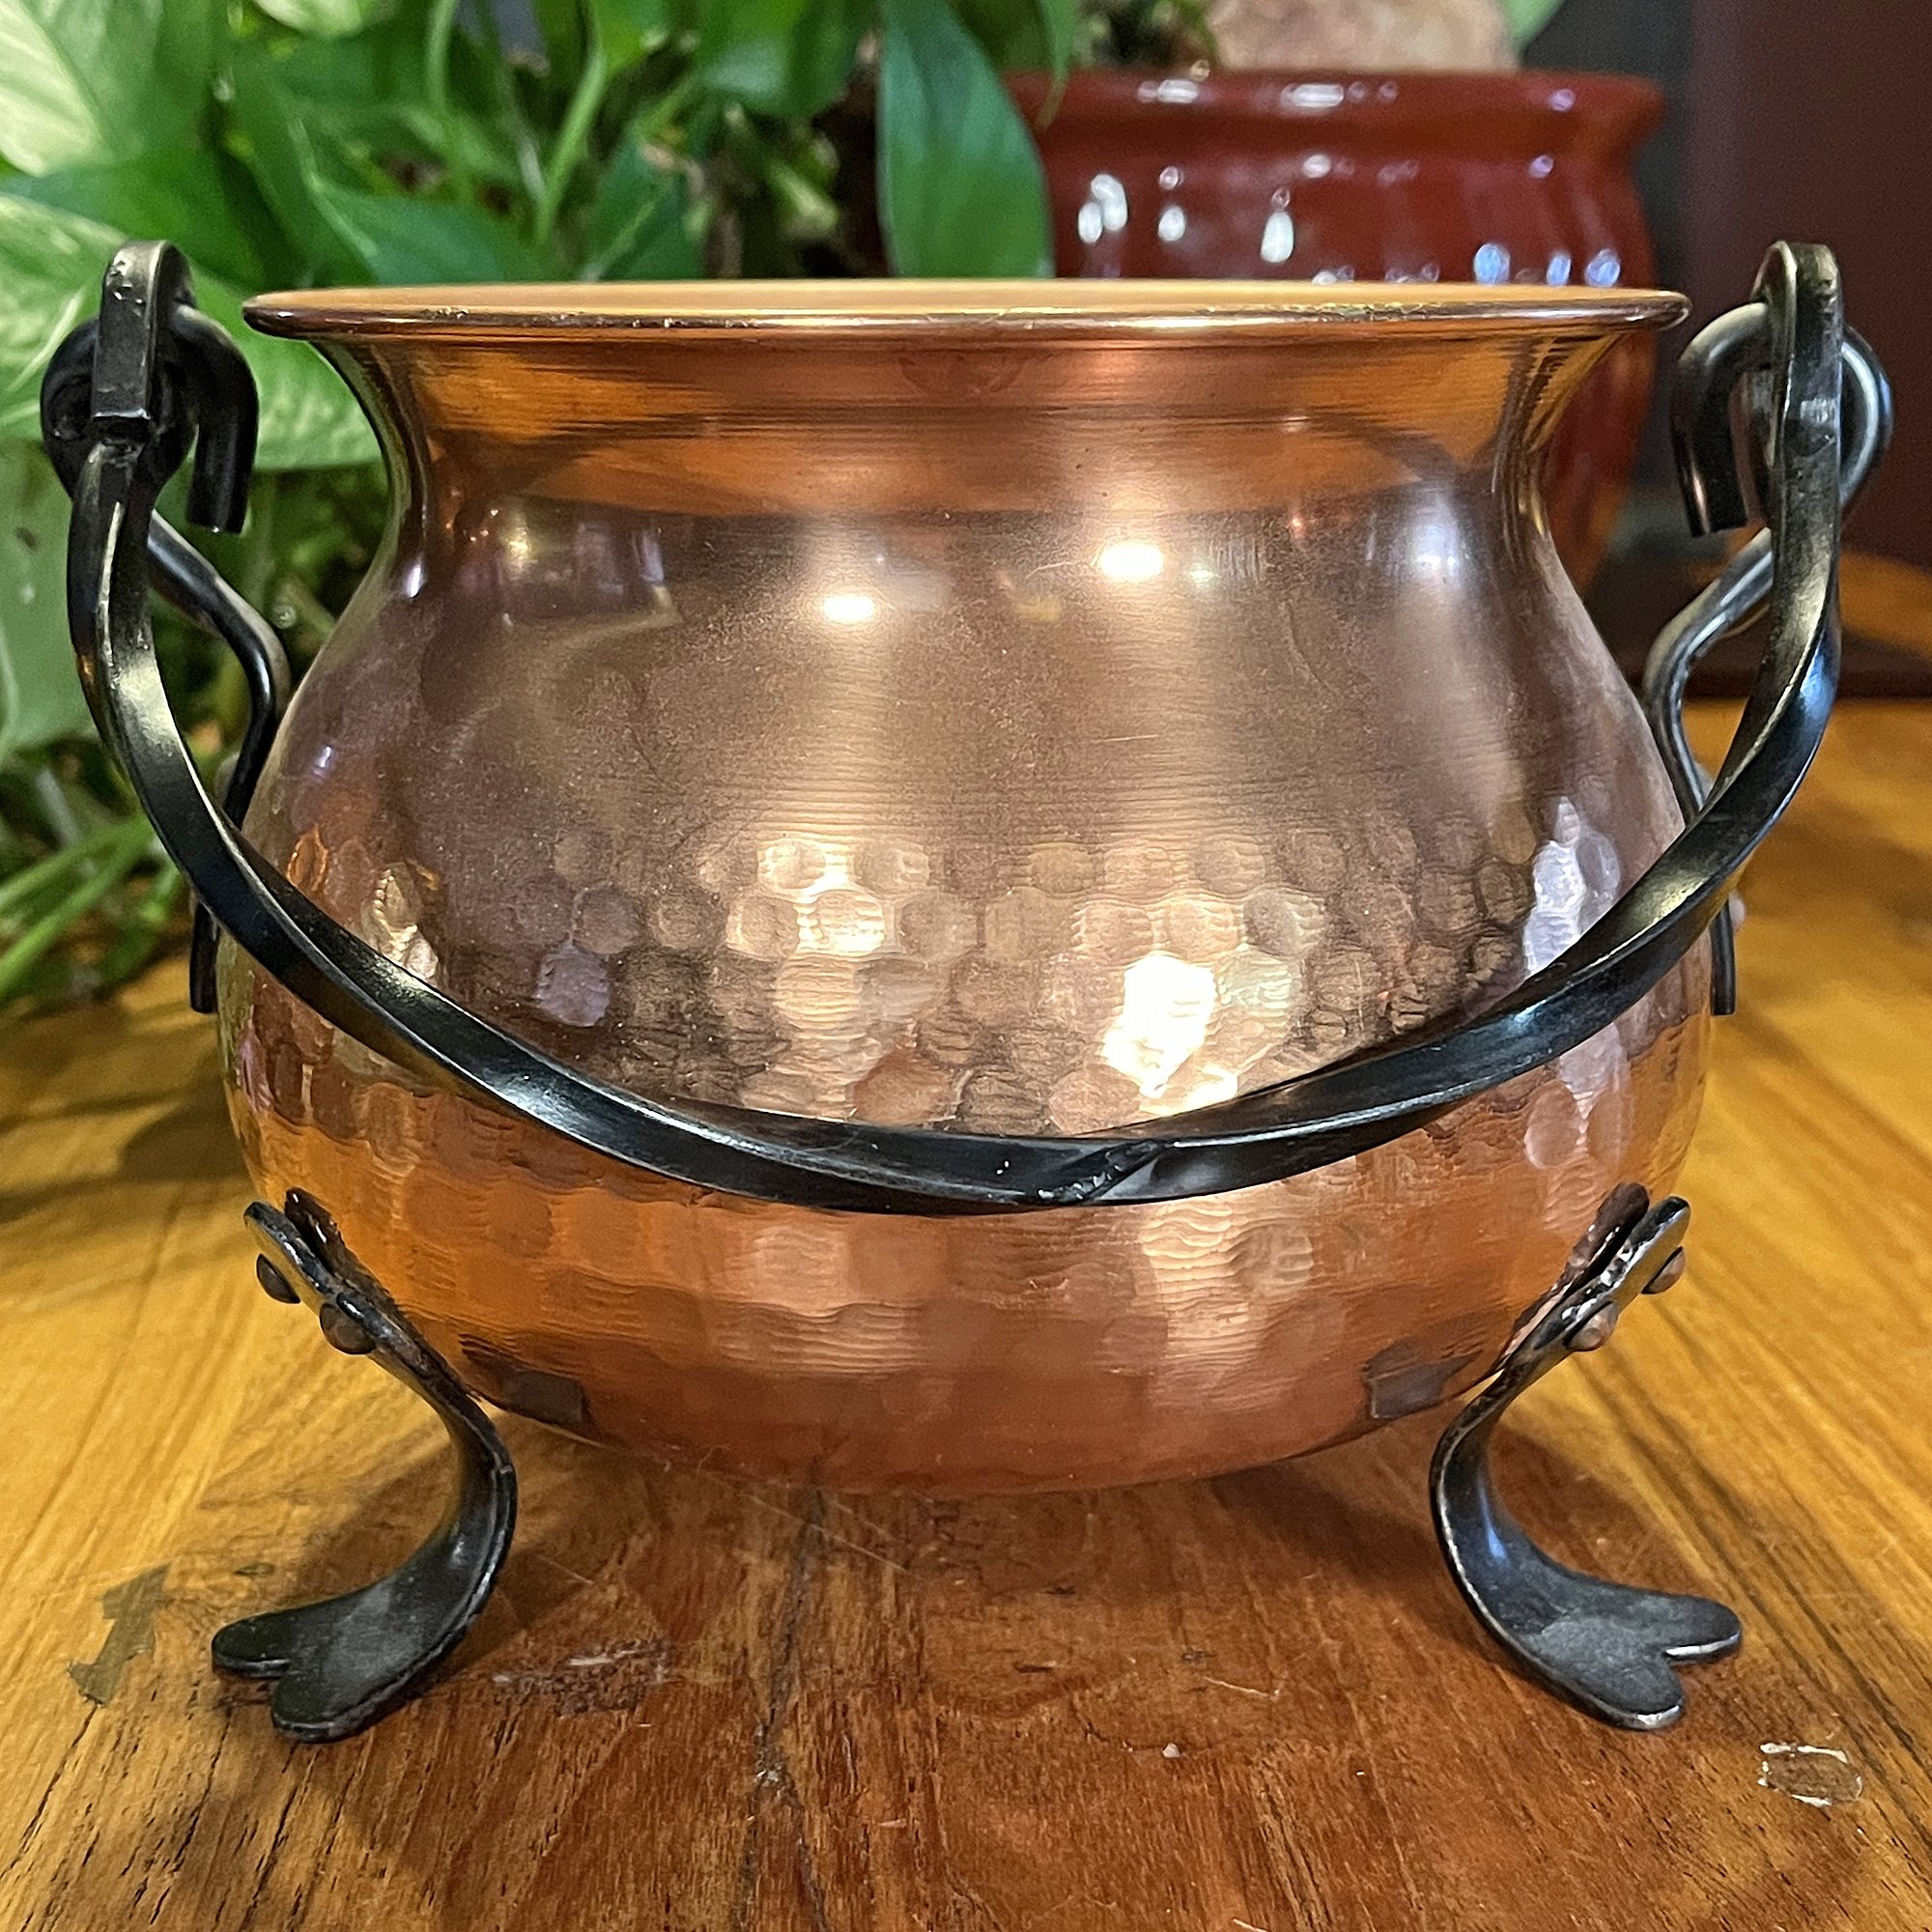 Looking for a new cauldron? We carry vintage, new, and new with handmade details all in copper, cast iron, brass, ceramic&mdash;even a cauldron starter set! Visit greenwitchvintage.com to see if we carry what you've been looking for.

#cauldrons #cau